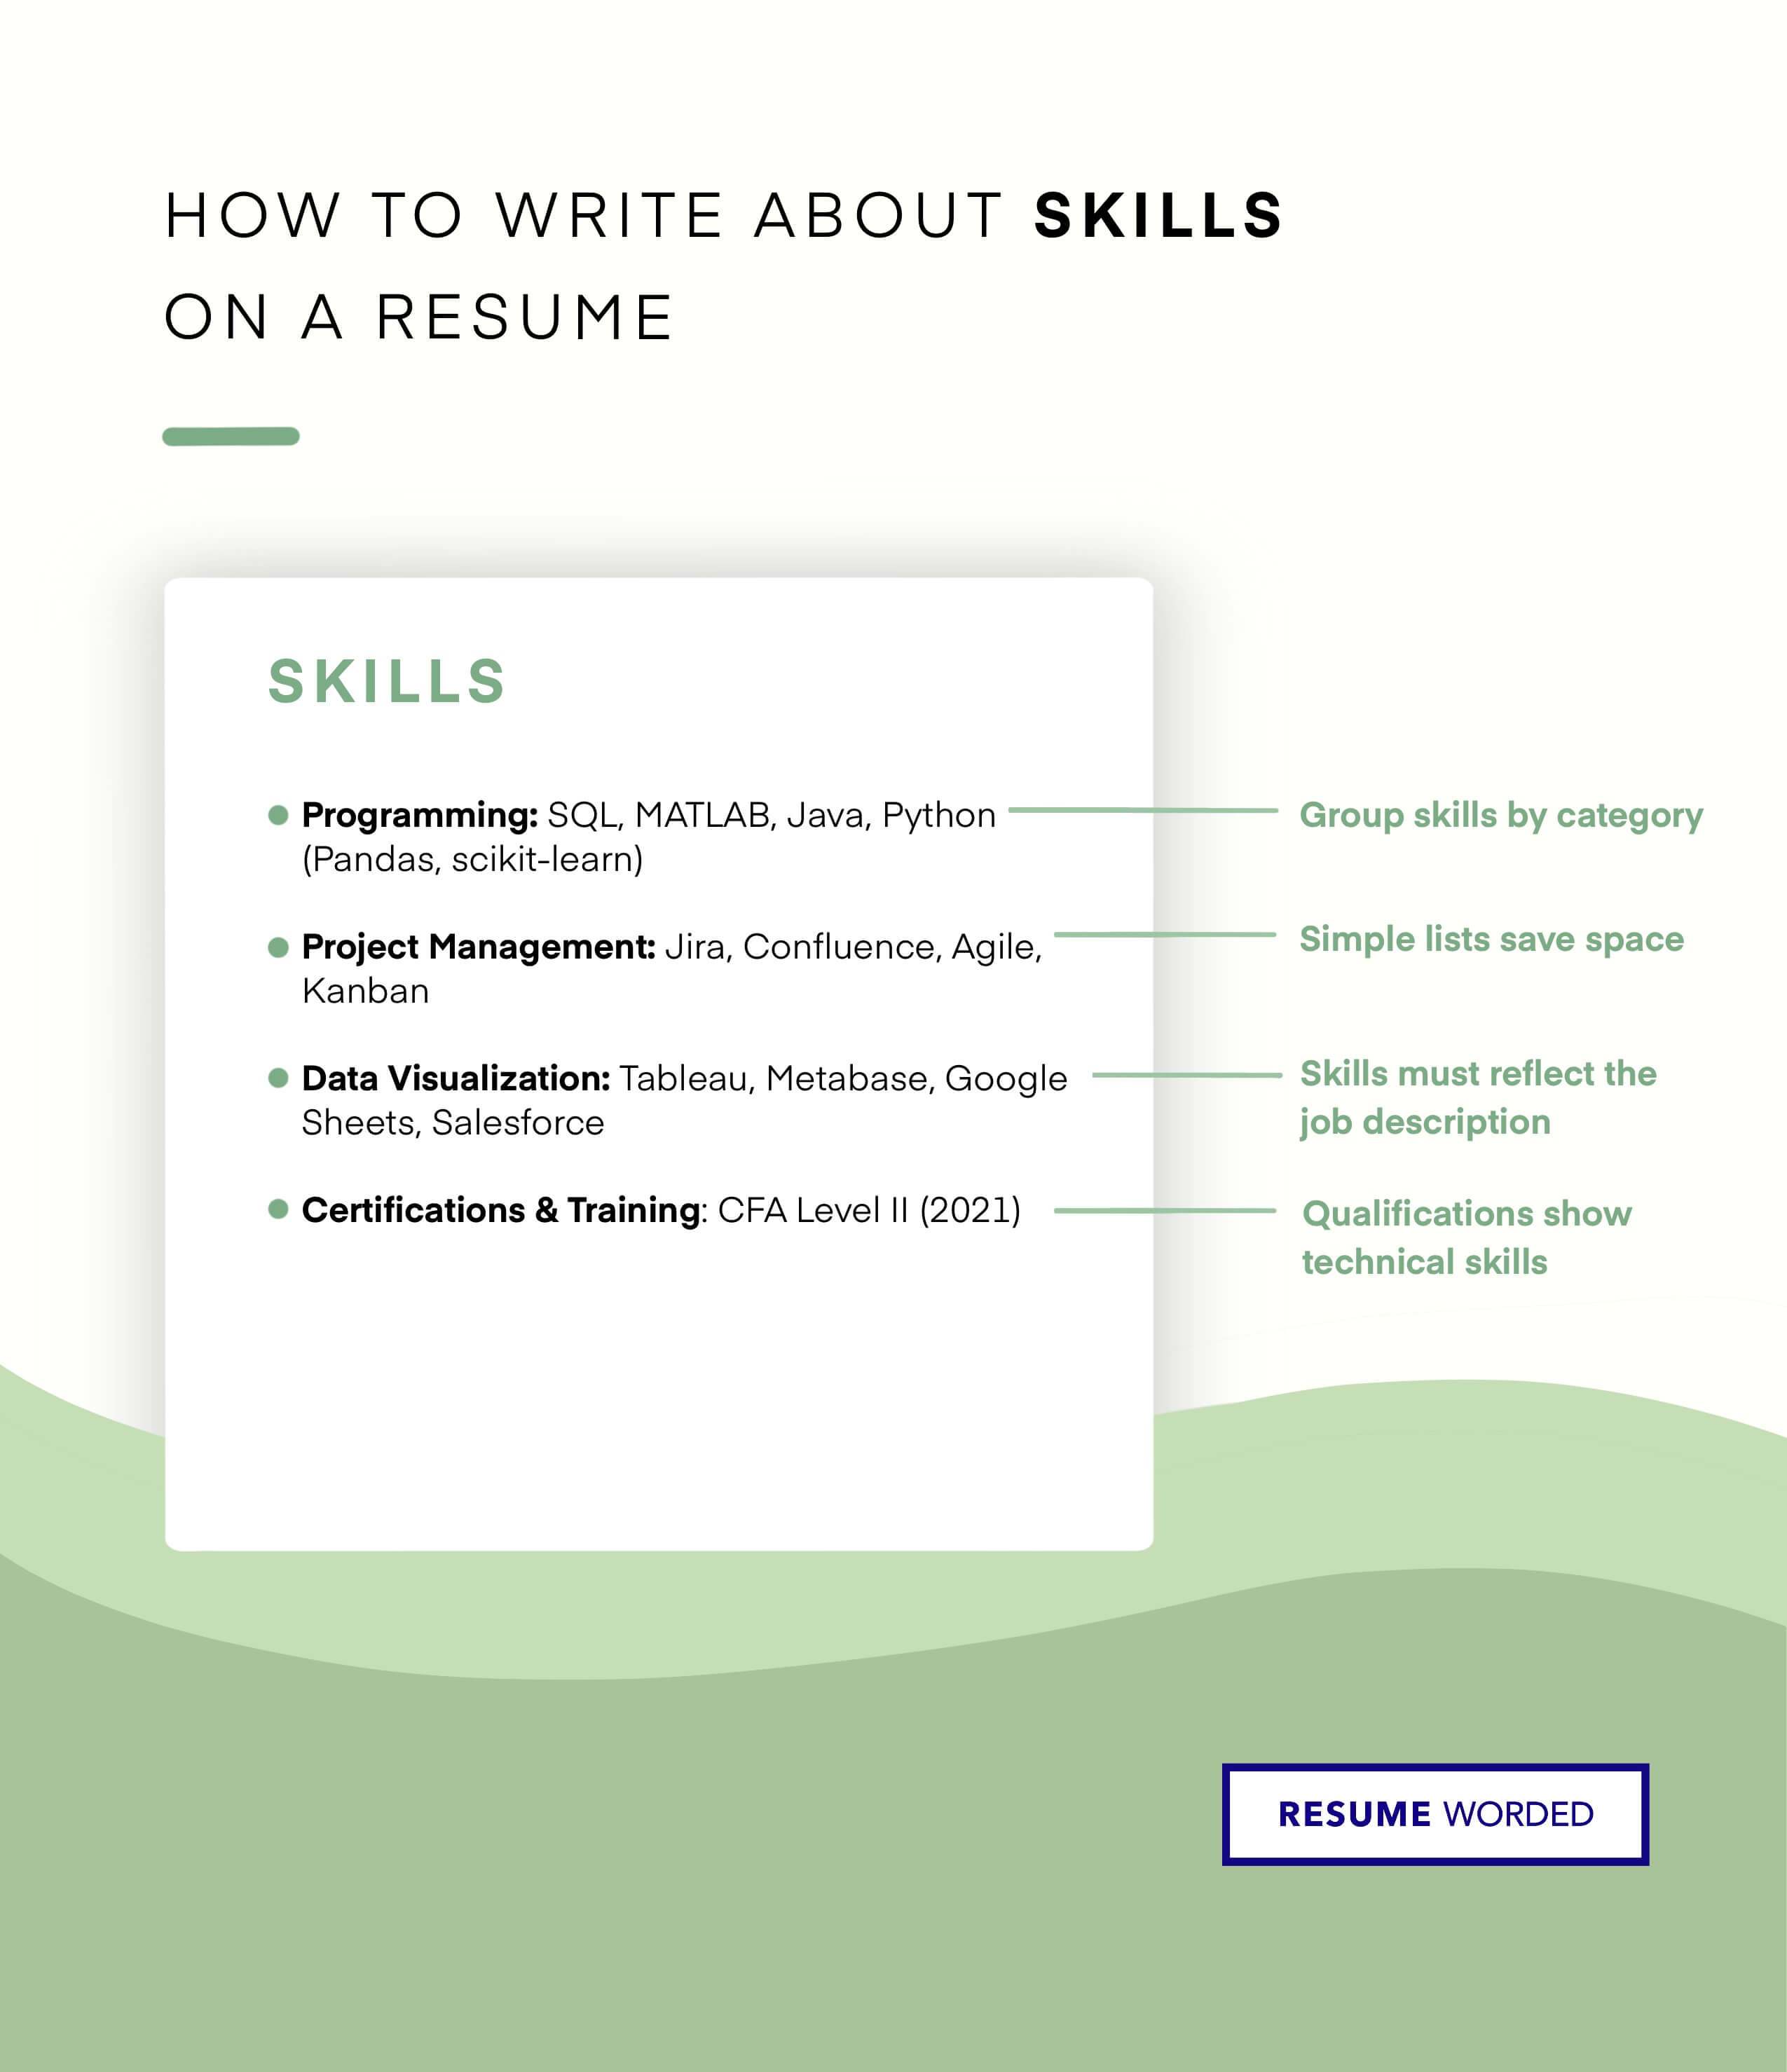 Show off your 'soft skills' - Entry-Level Occupational Therapist CV